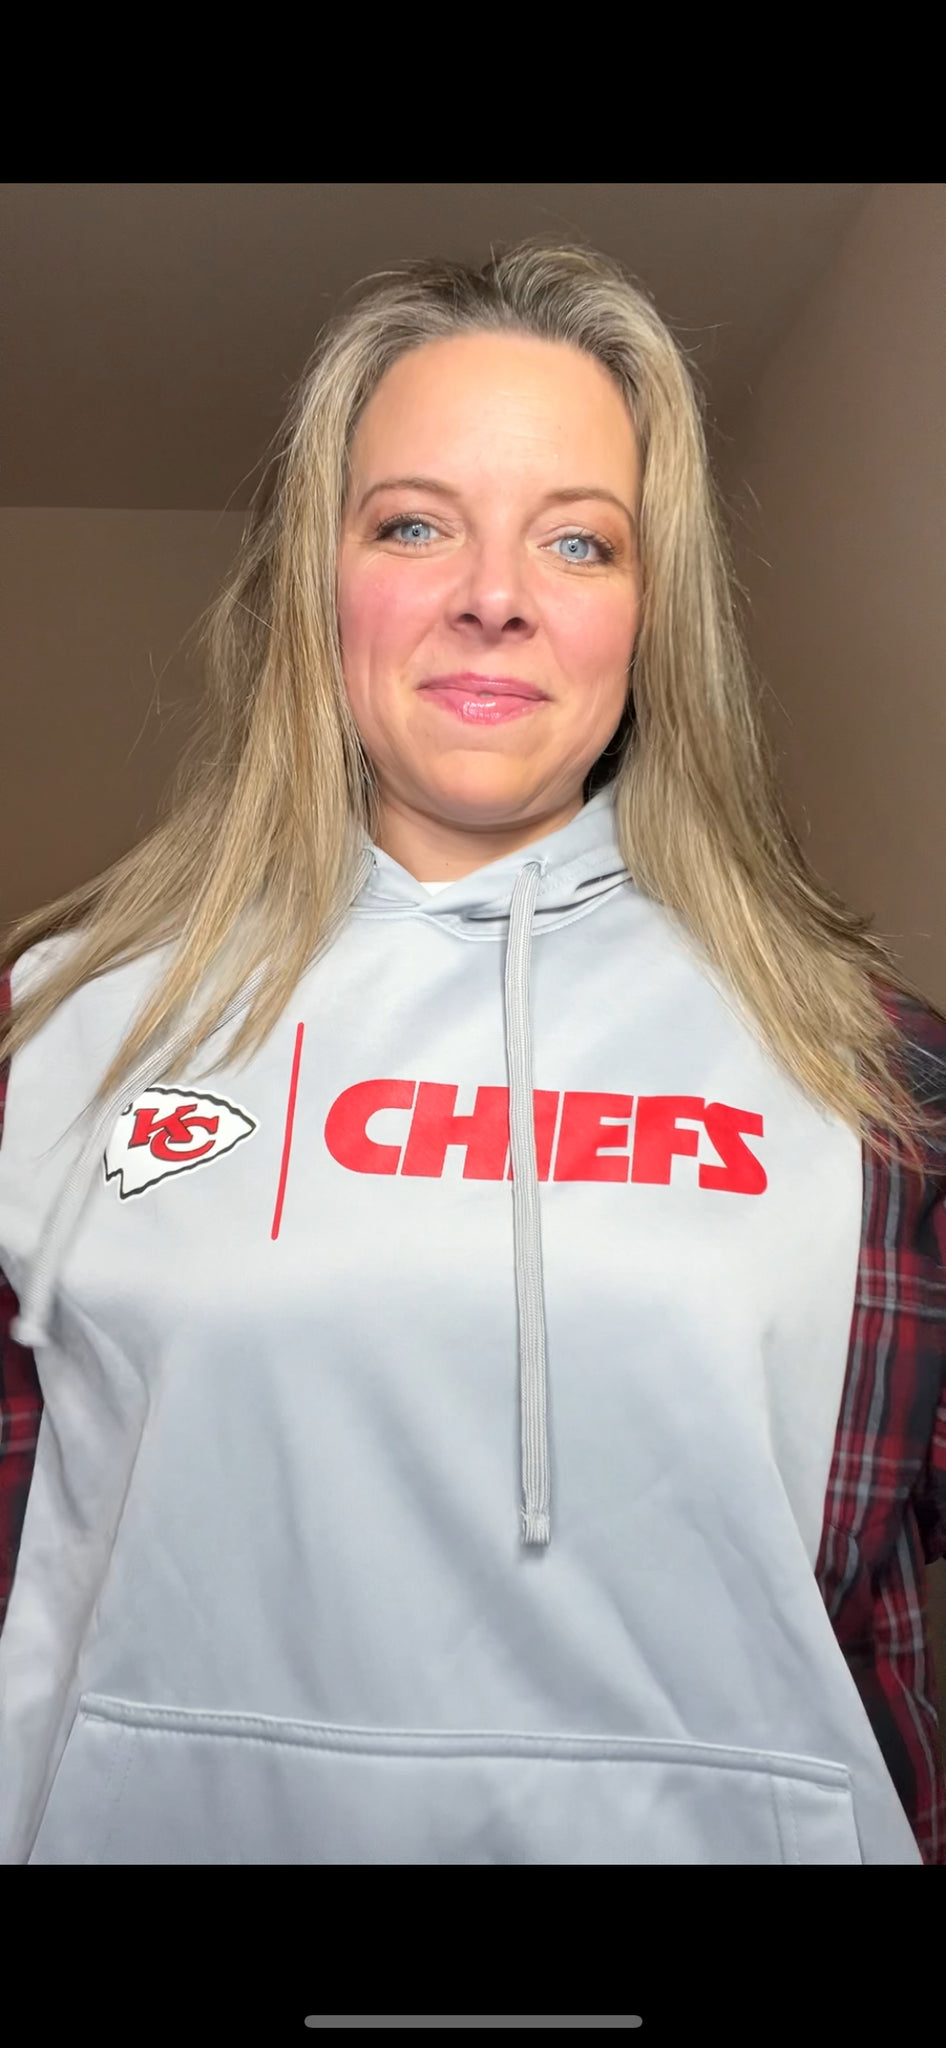 KC Chiefs - woman’s large - waistband doesn’t stretch much